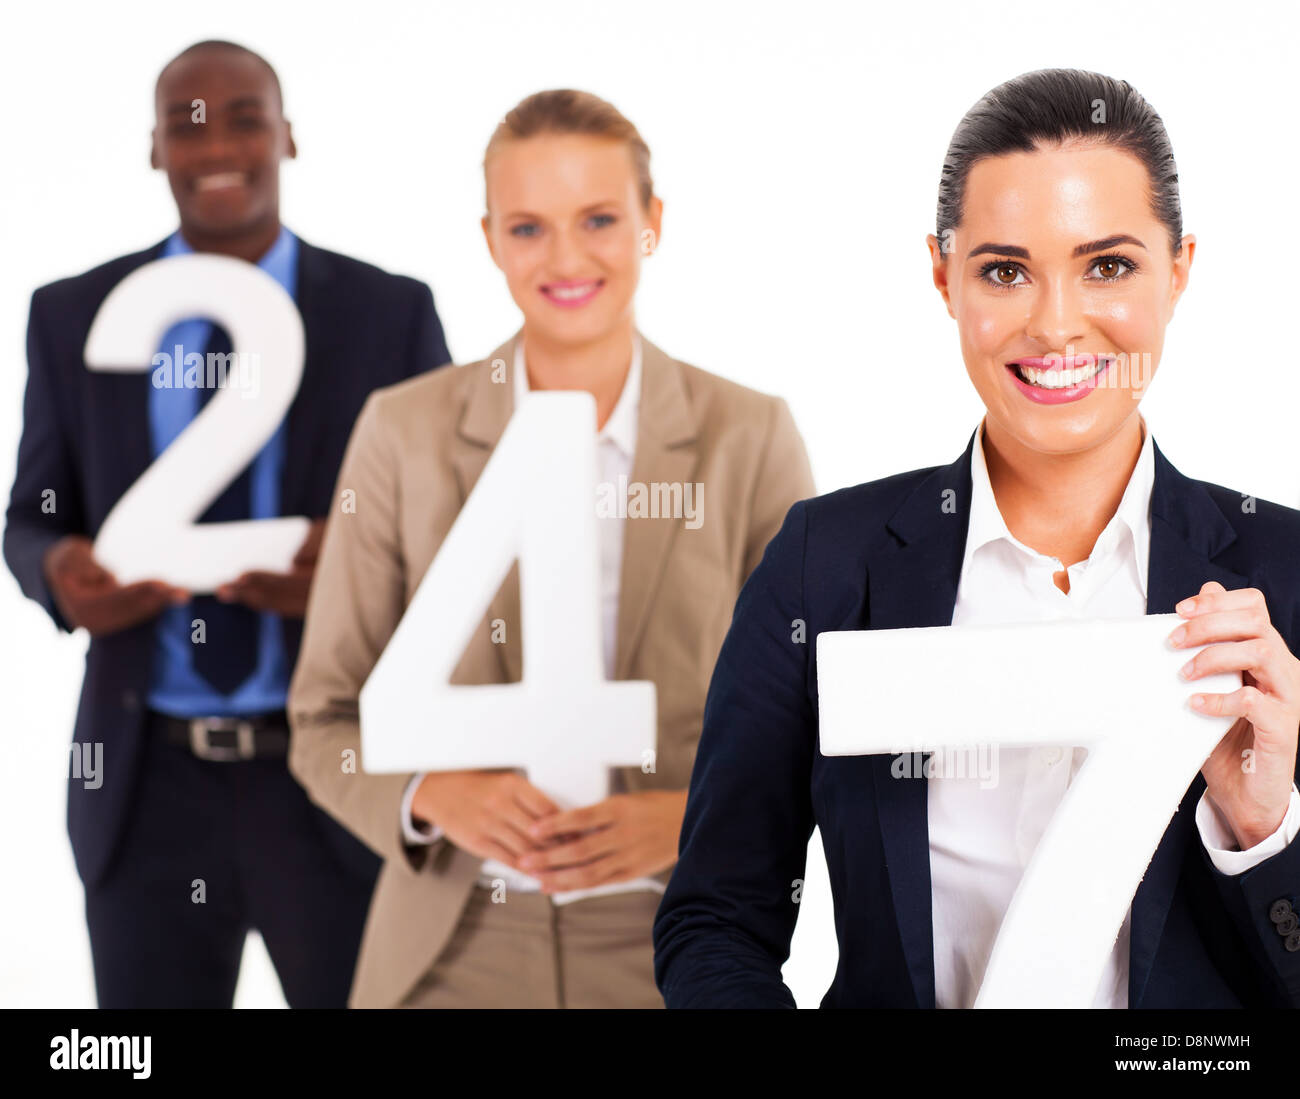 group of business people holding numbers 24 7 Stock Photo